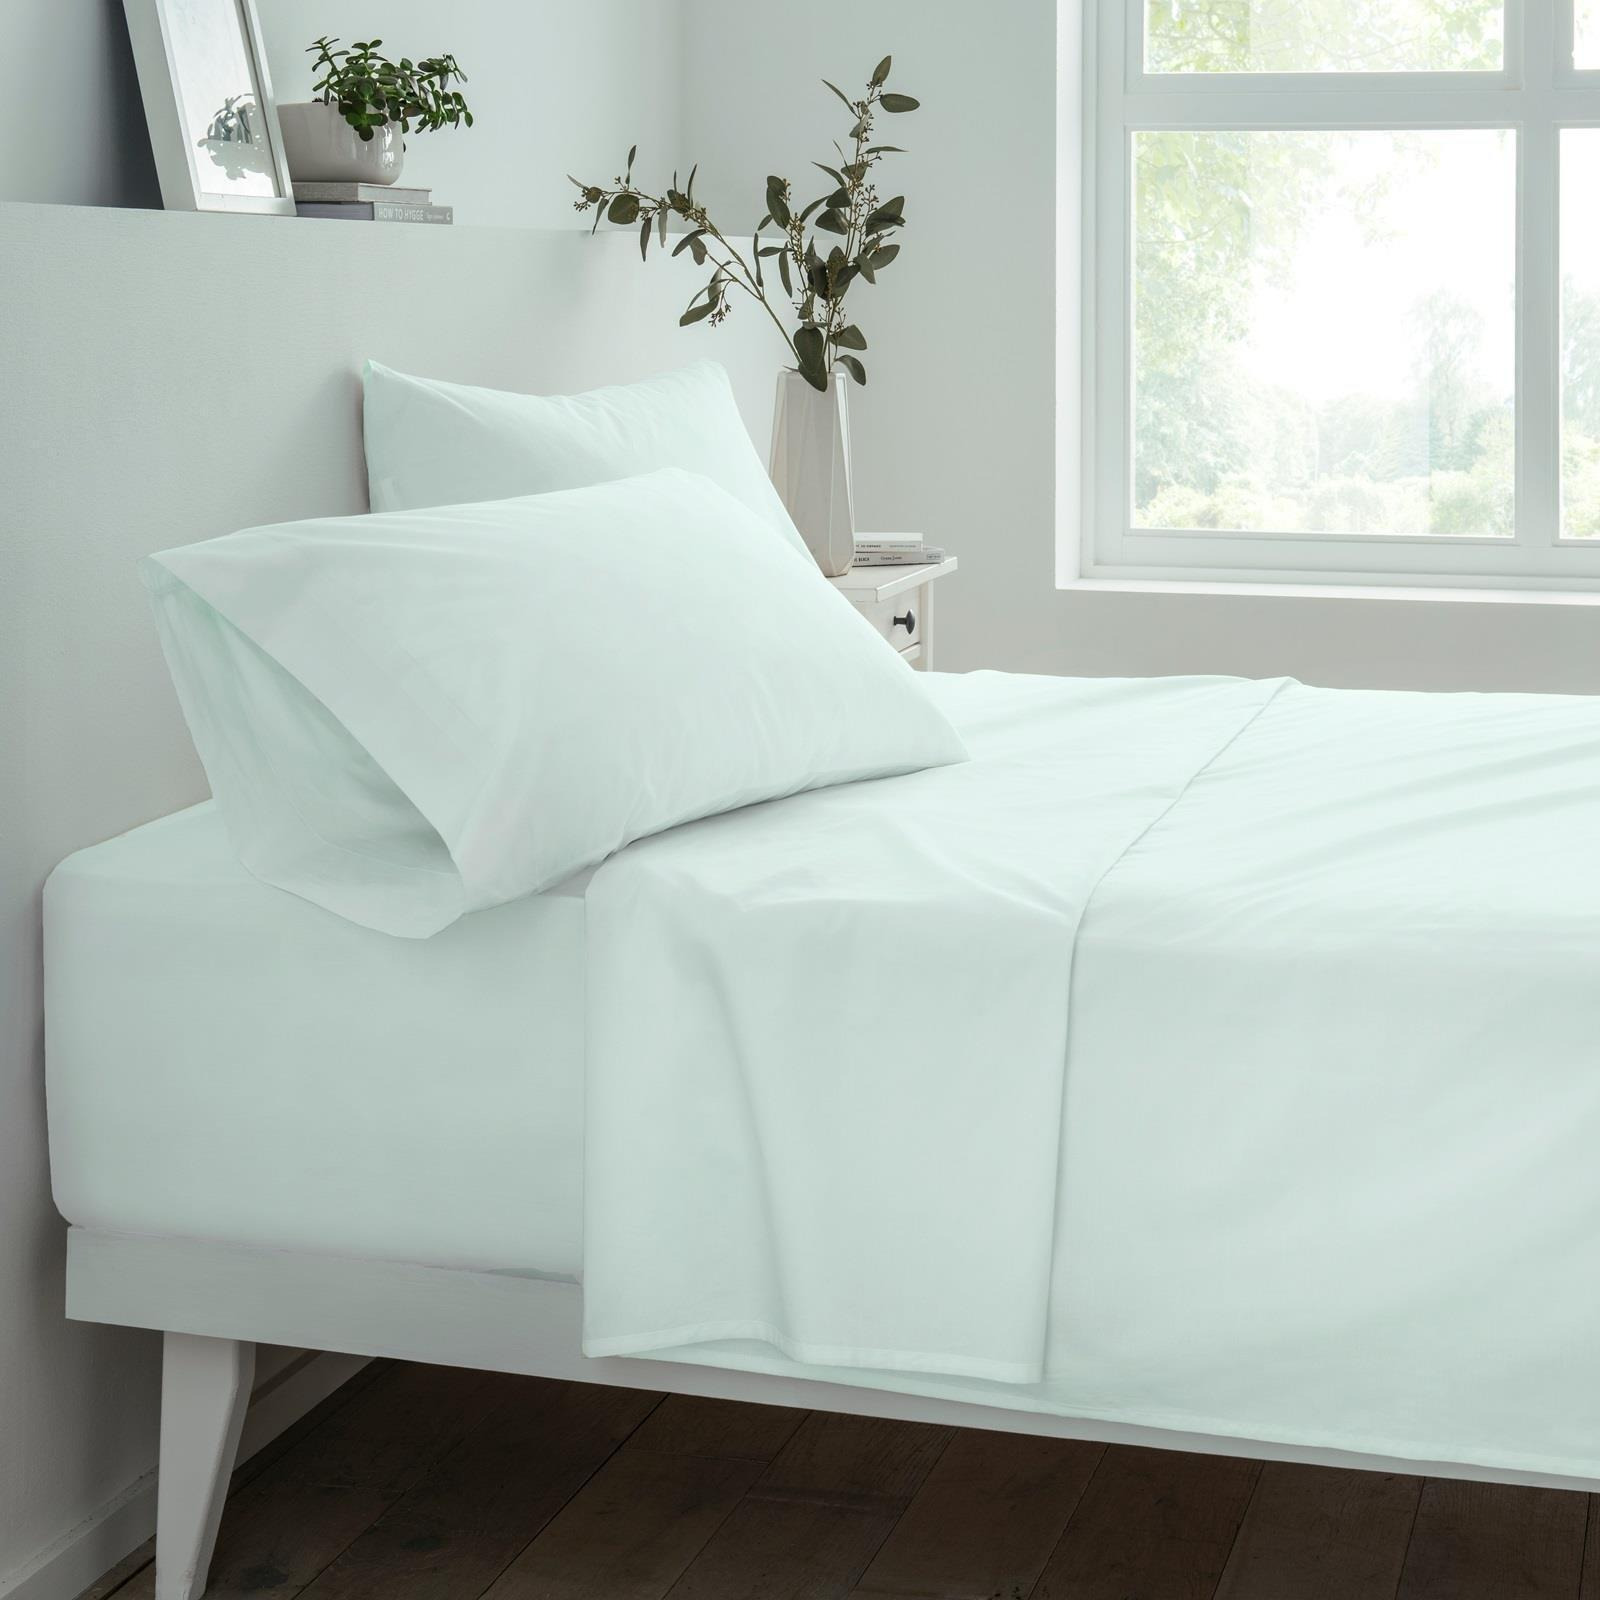 Fitted Sheet Polycotton Bed Linen 25cm Deep Bedding - image 1